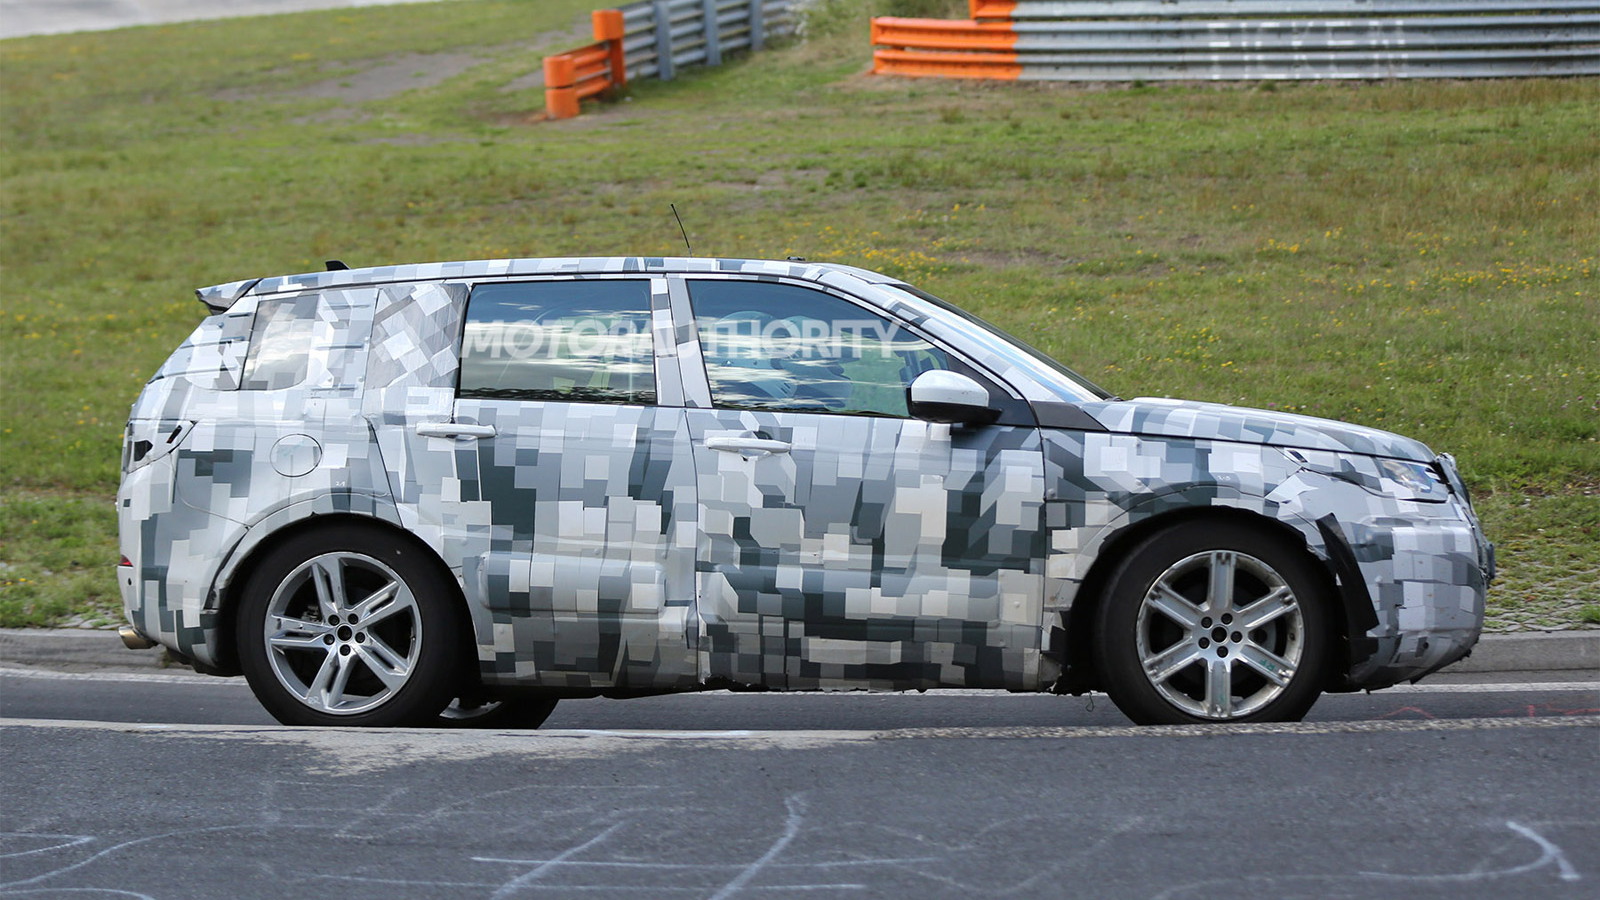 2016 Land Rover Discovery Sport (LR2 replacement) spy shots